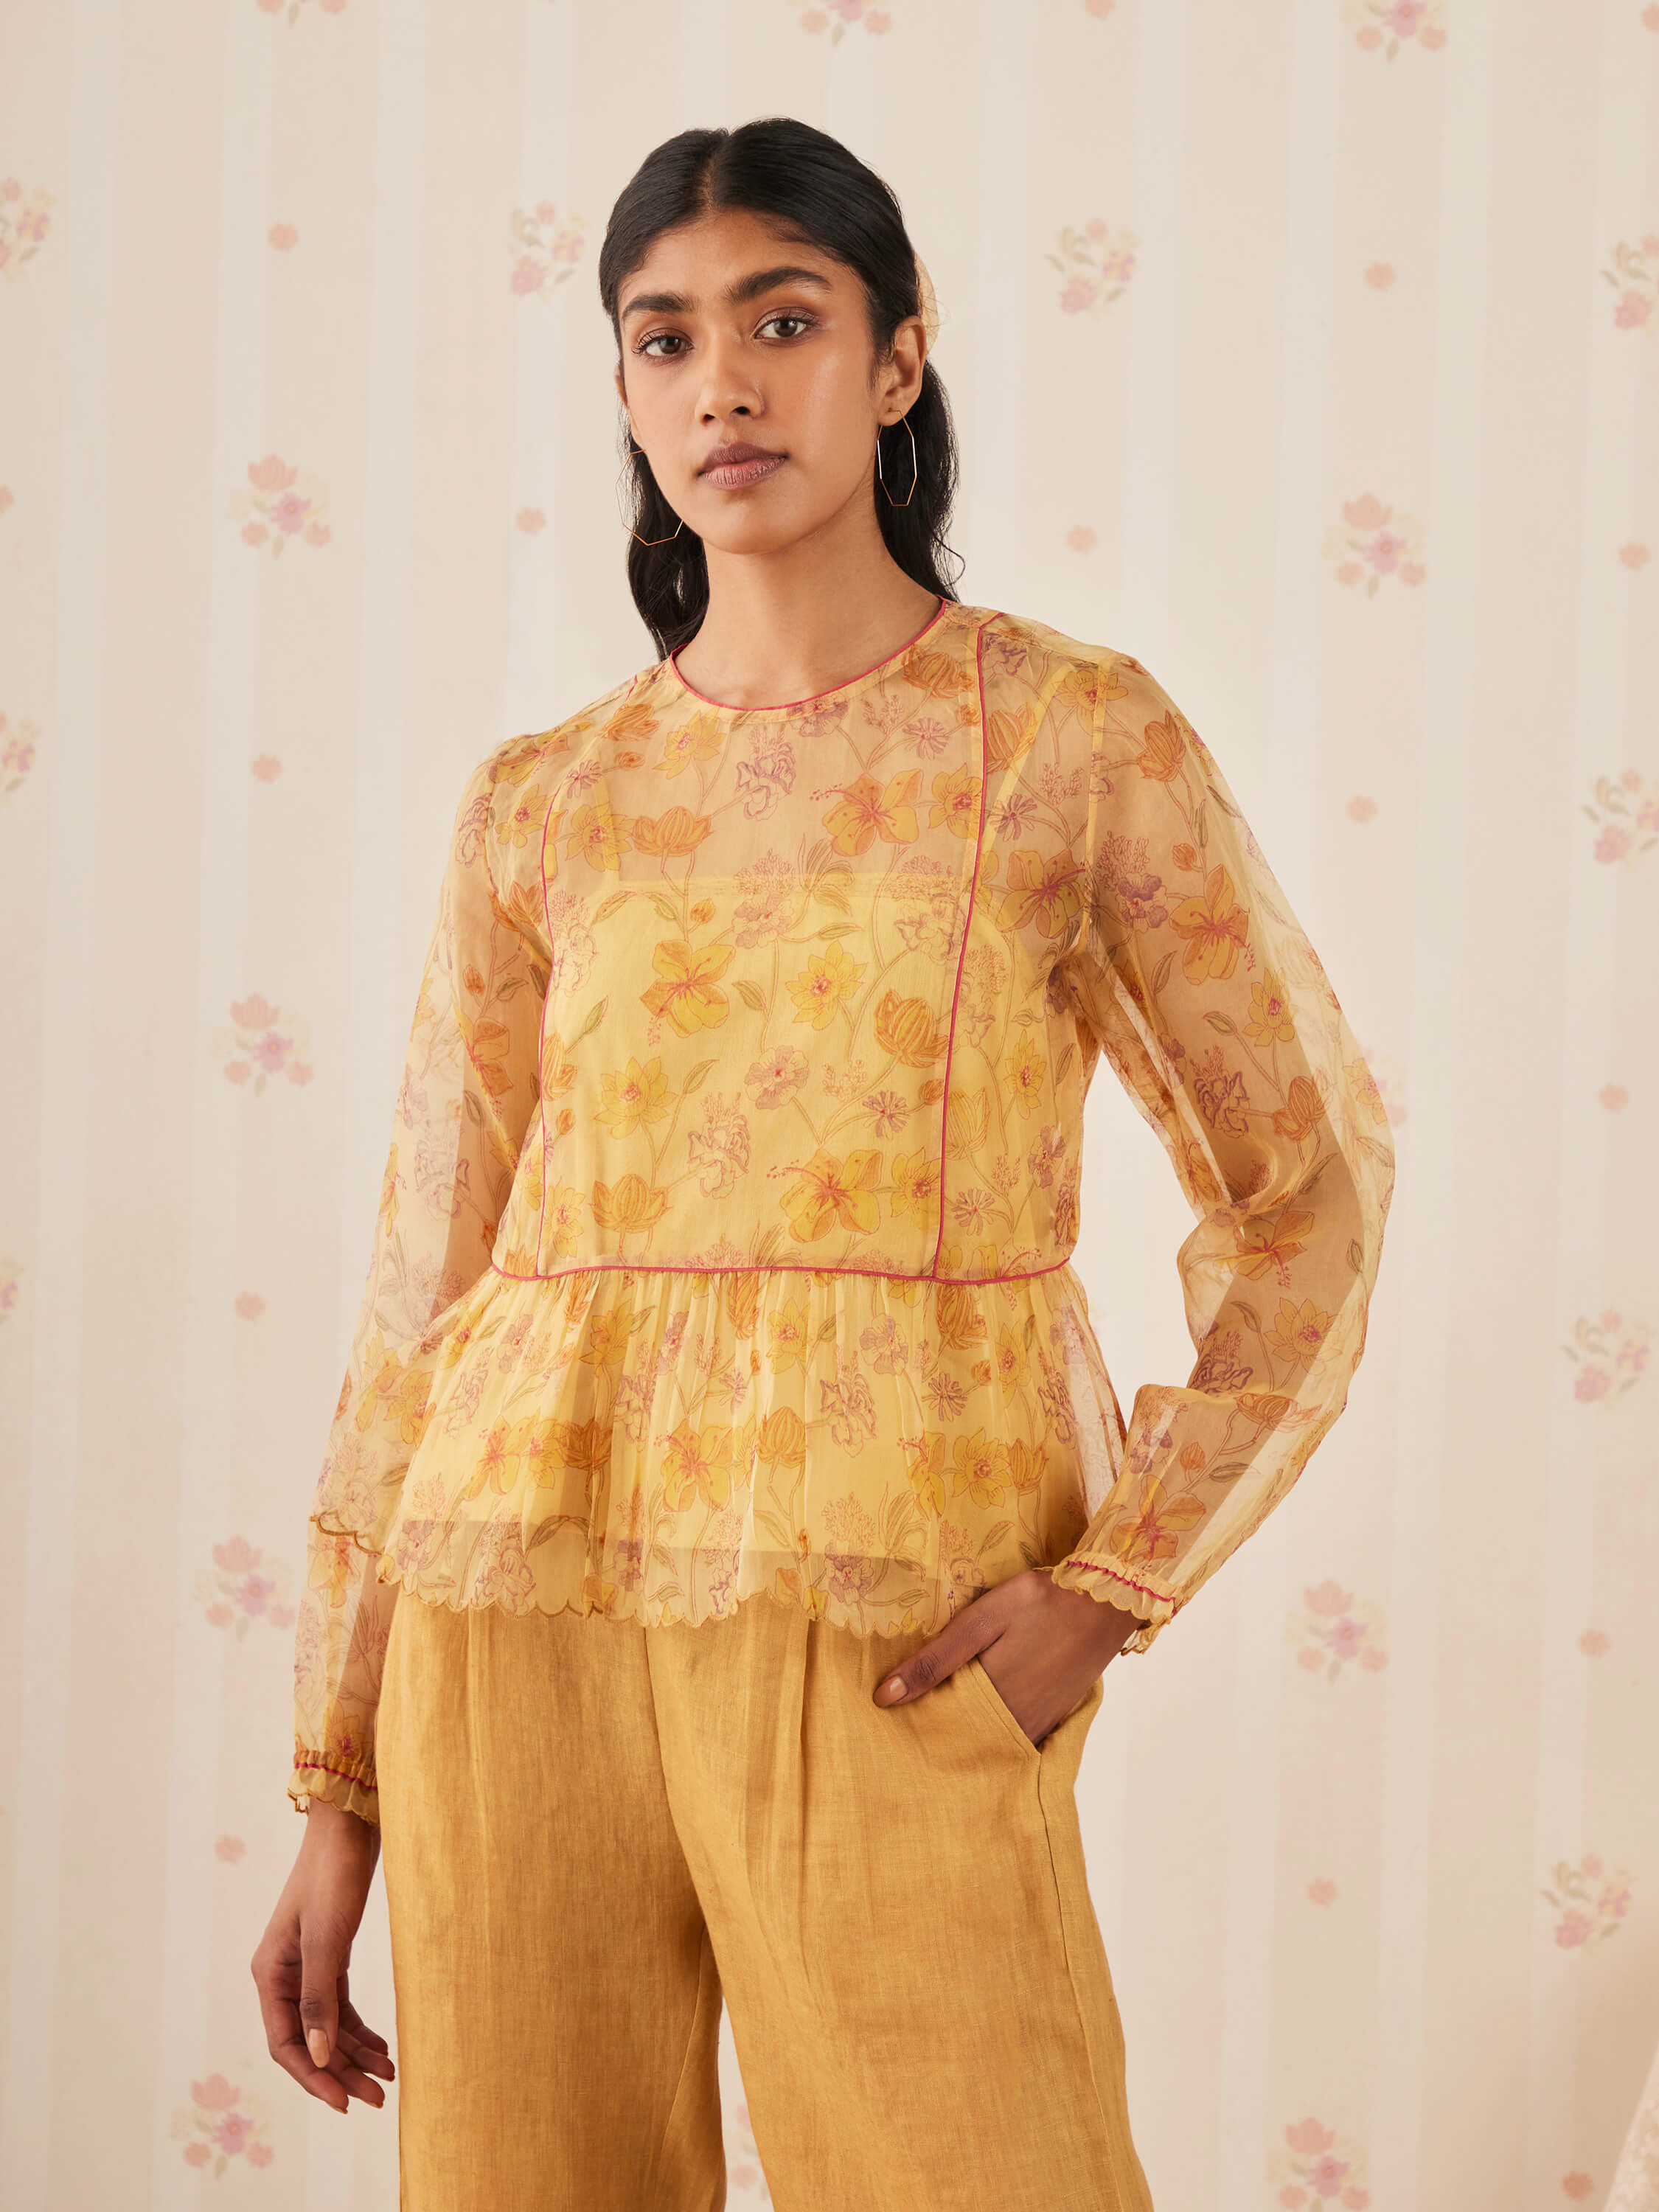 Woman in yellow floral blouse and yellow trousers against floral wallpaper.